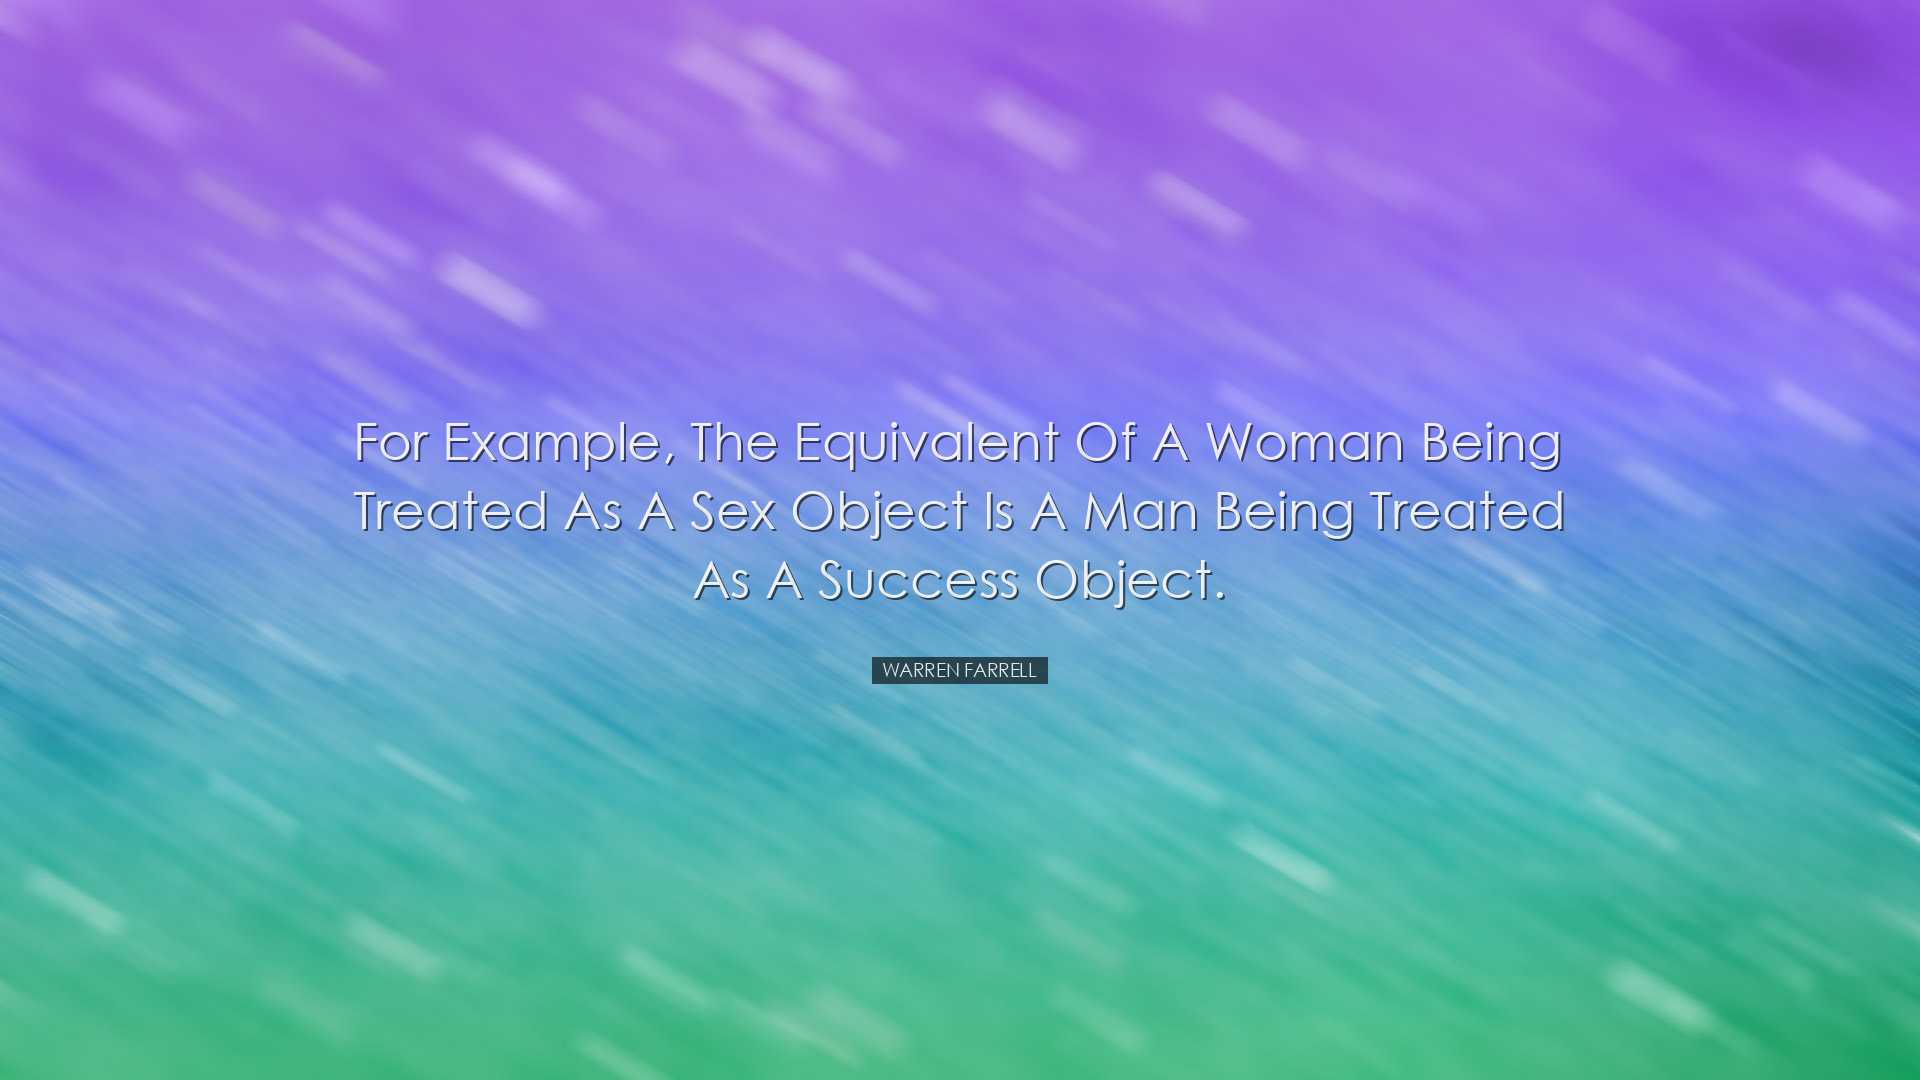 For example, the equivalent of a woman being treated as a sex obje